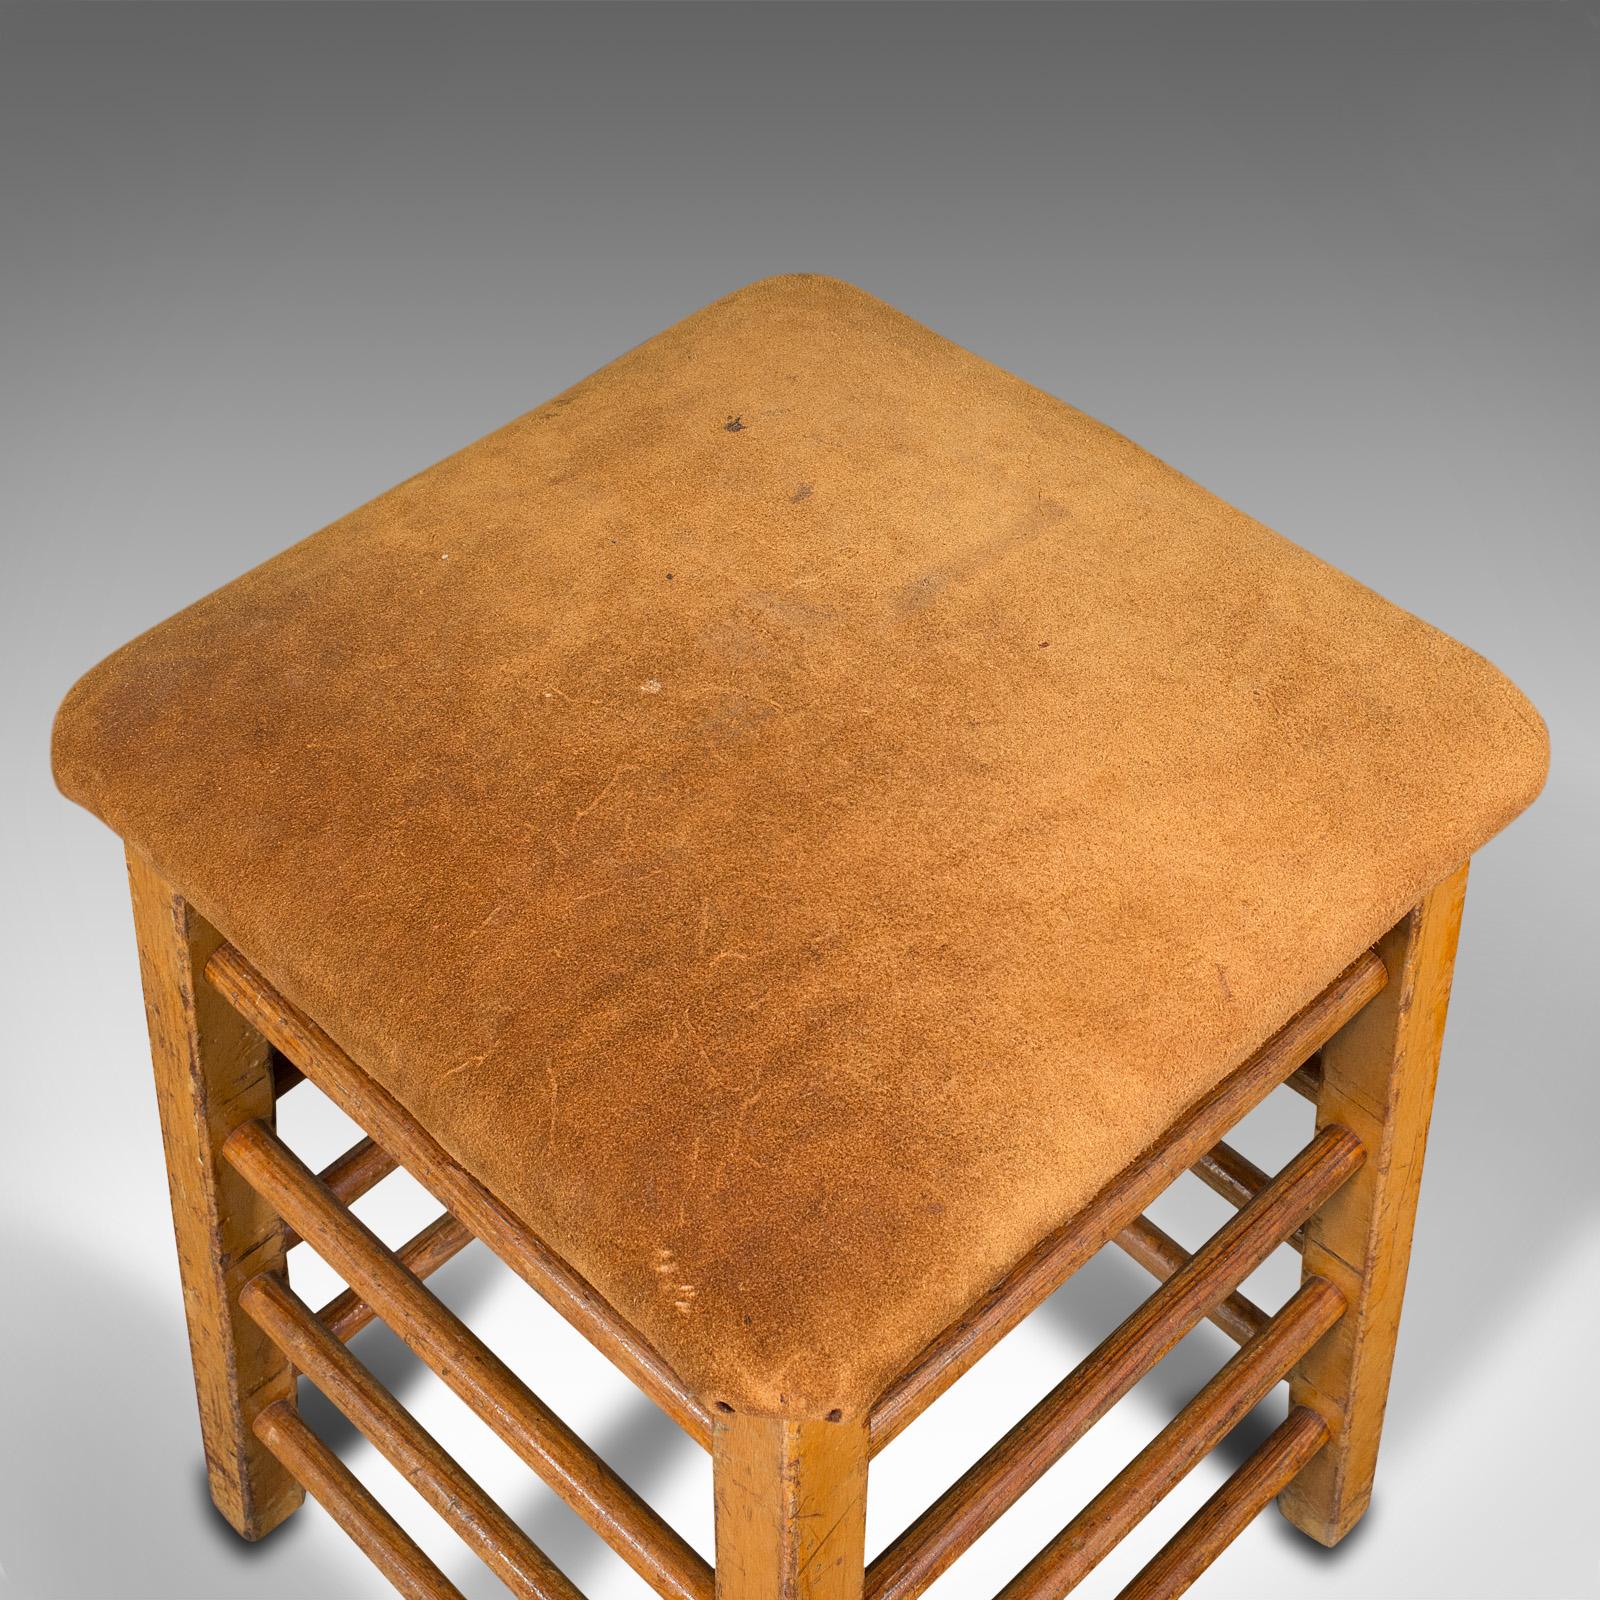 Large Vintage Artist's Stool, English, Pitch Pine, Suede, Gym, Lab Seat, C.1960 For Sale 2